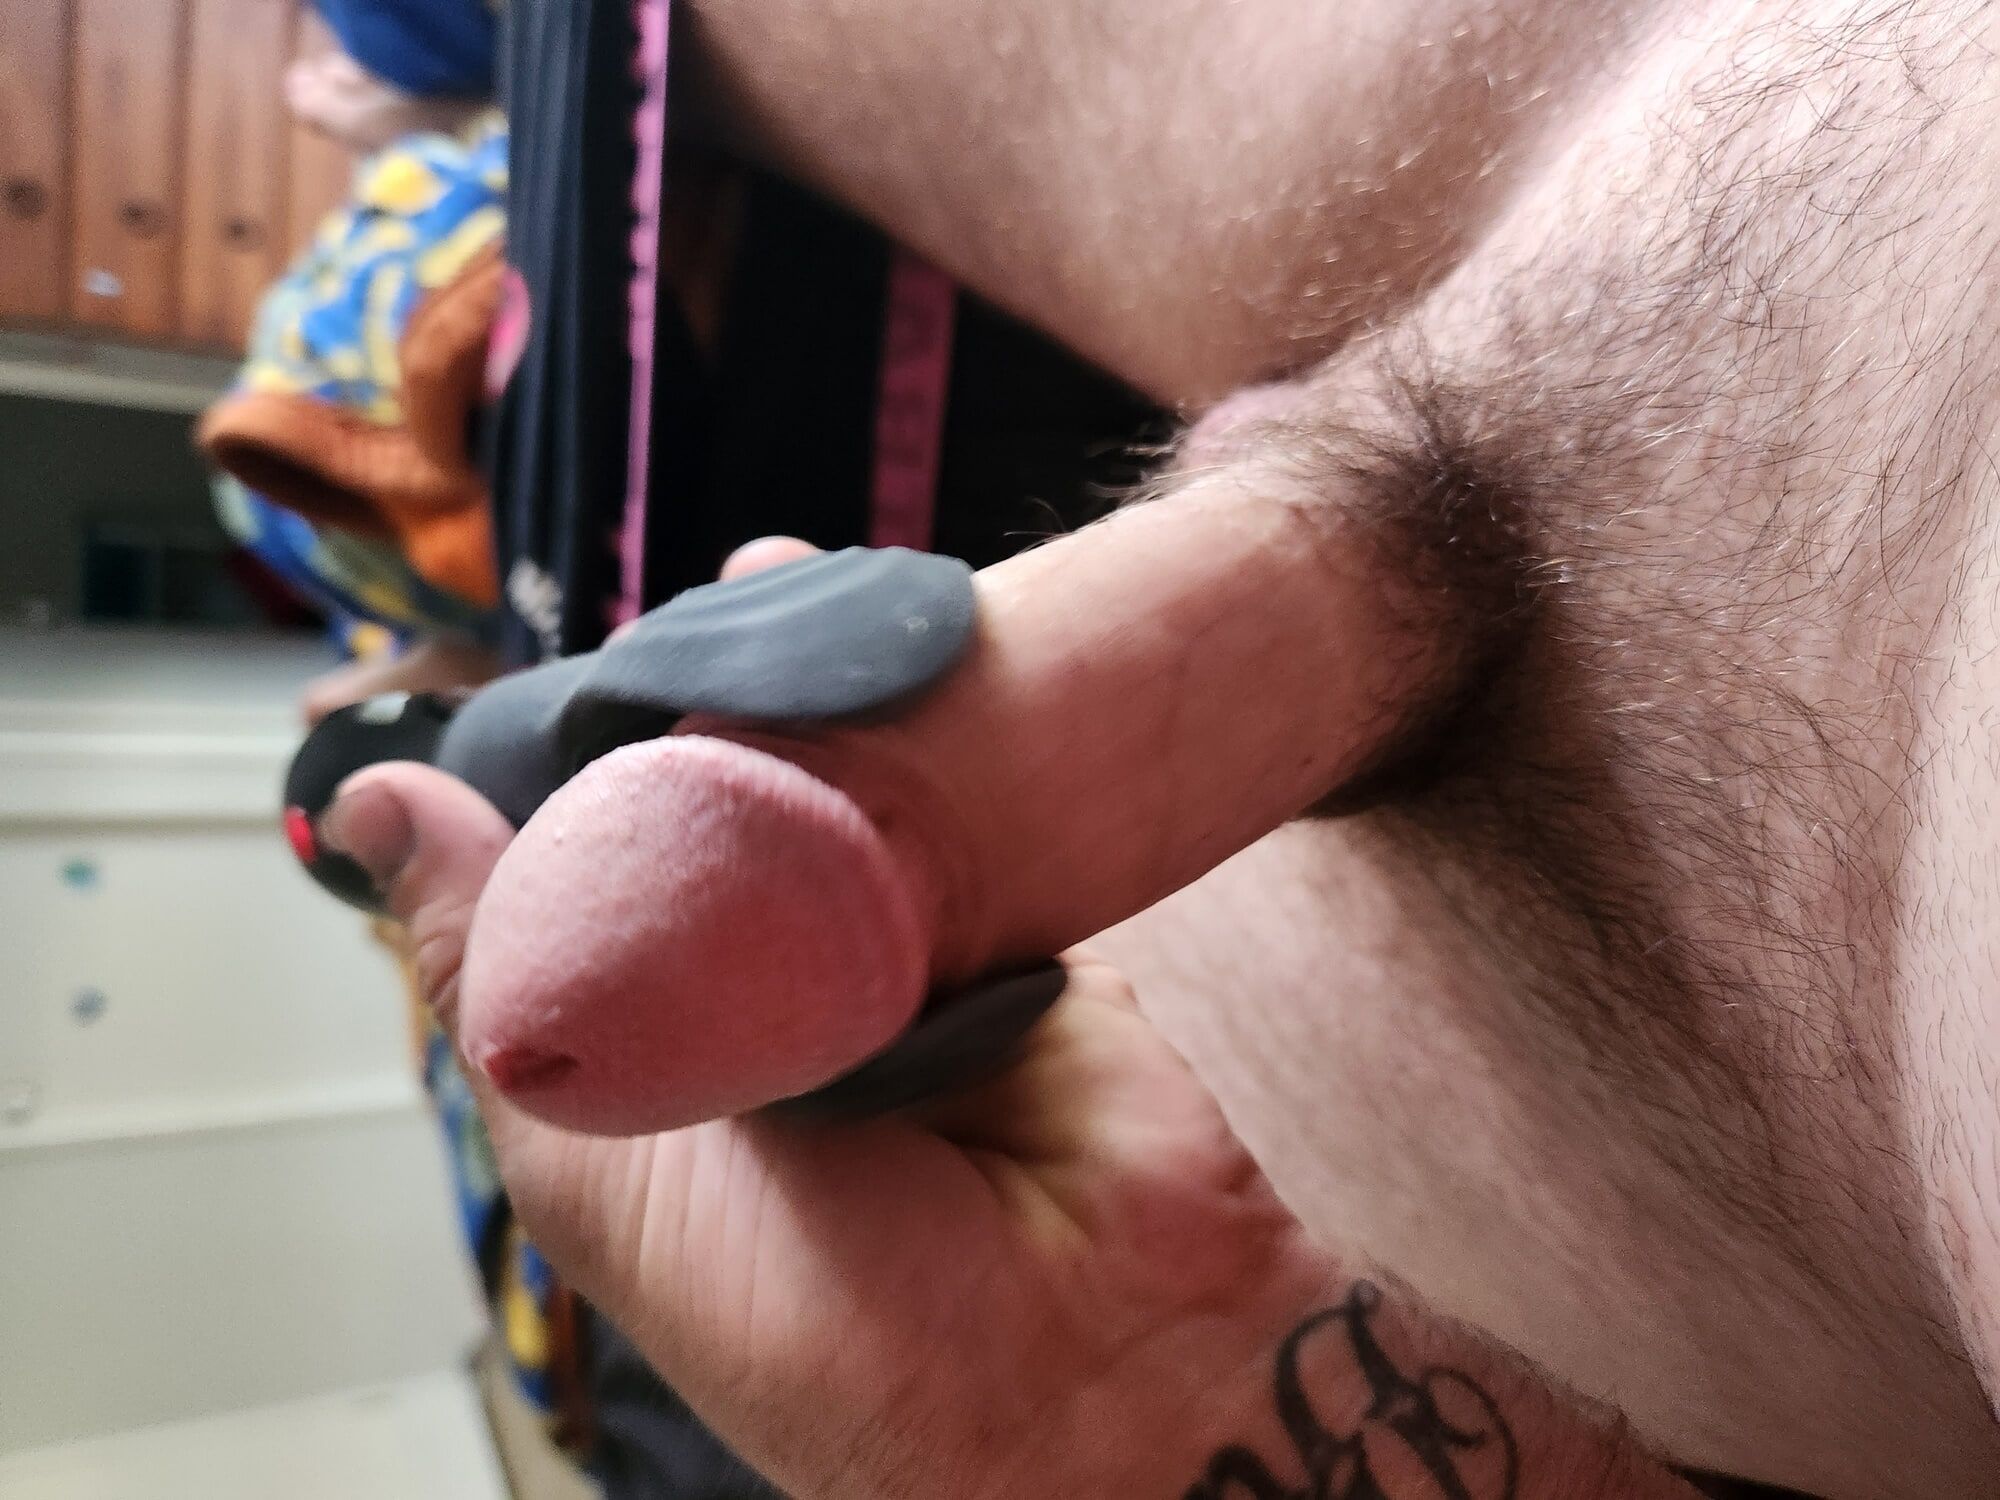 Dick photos for the girls